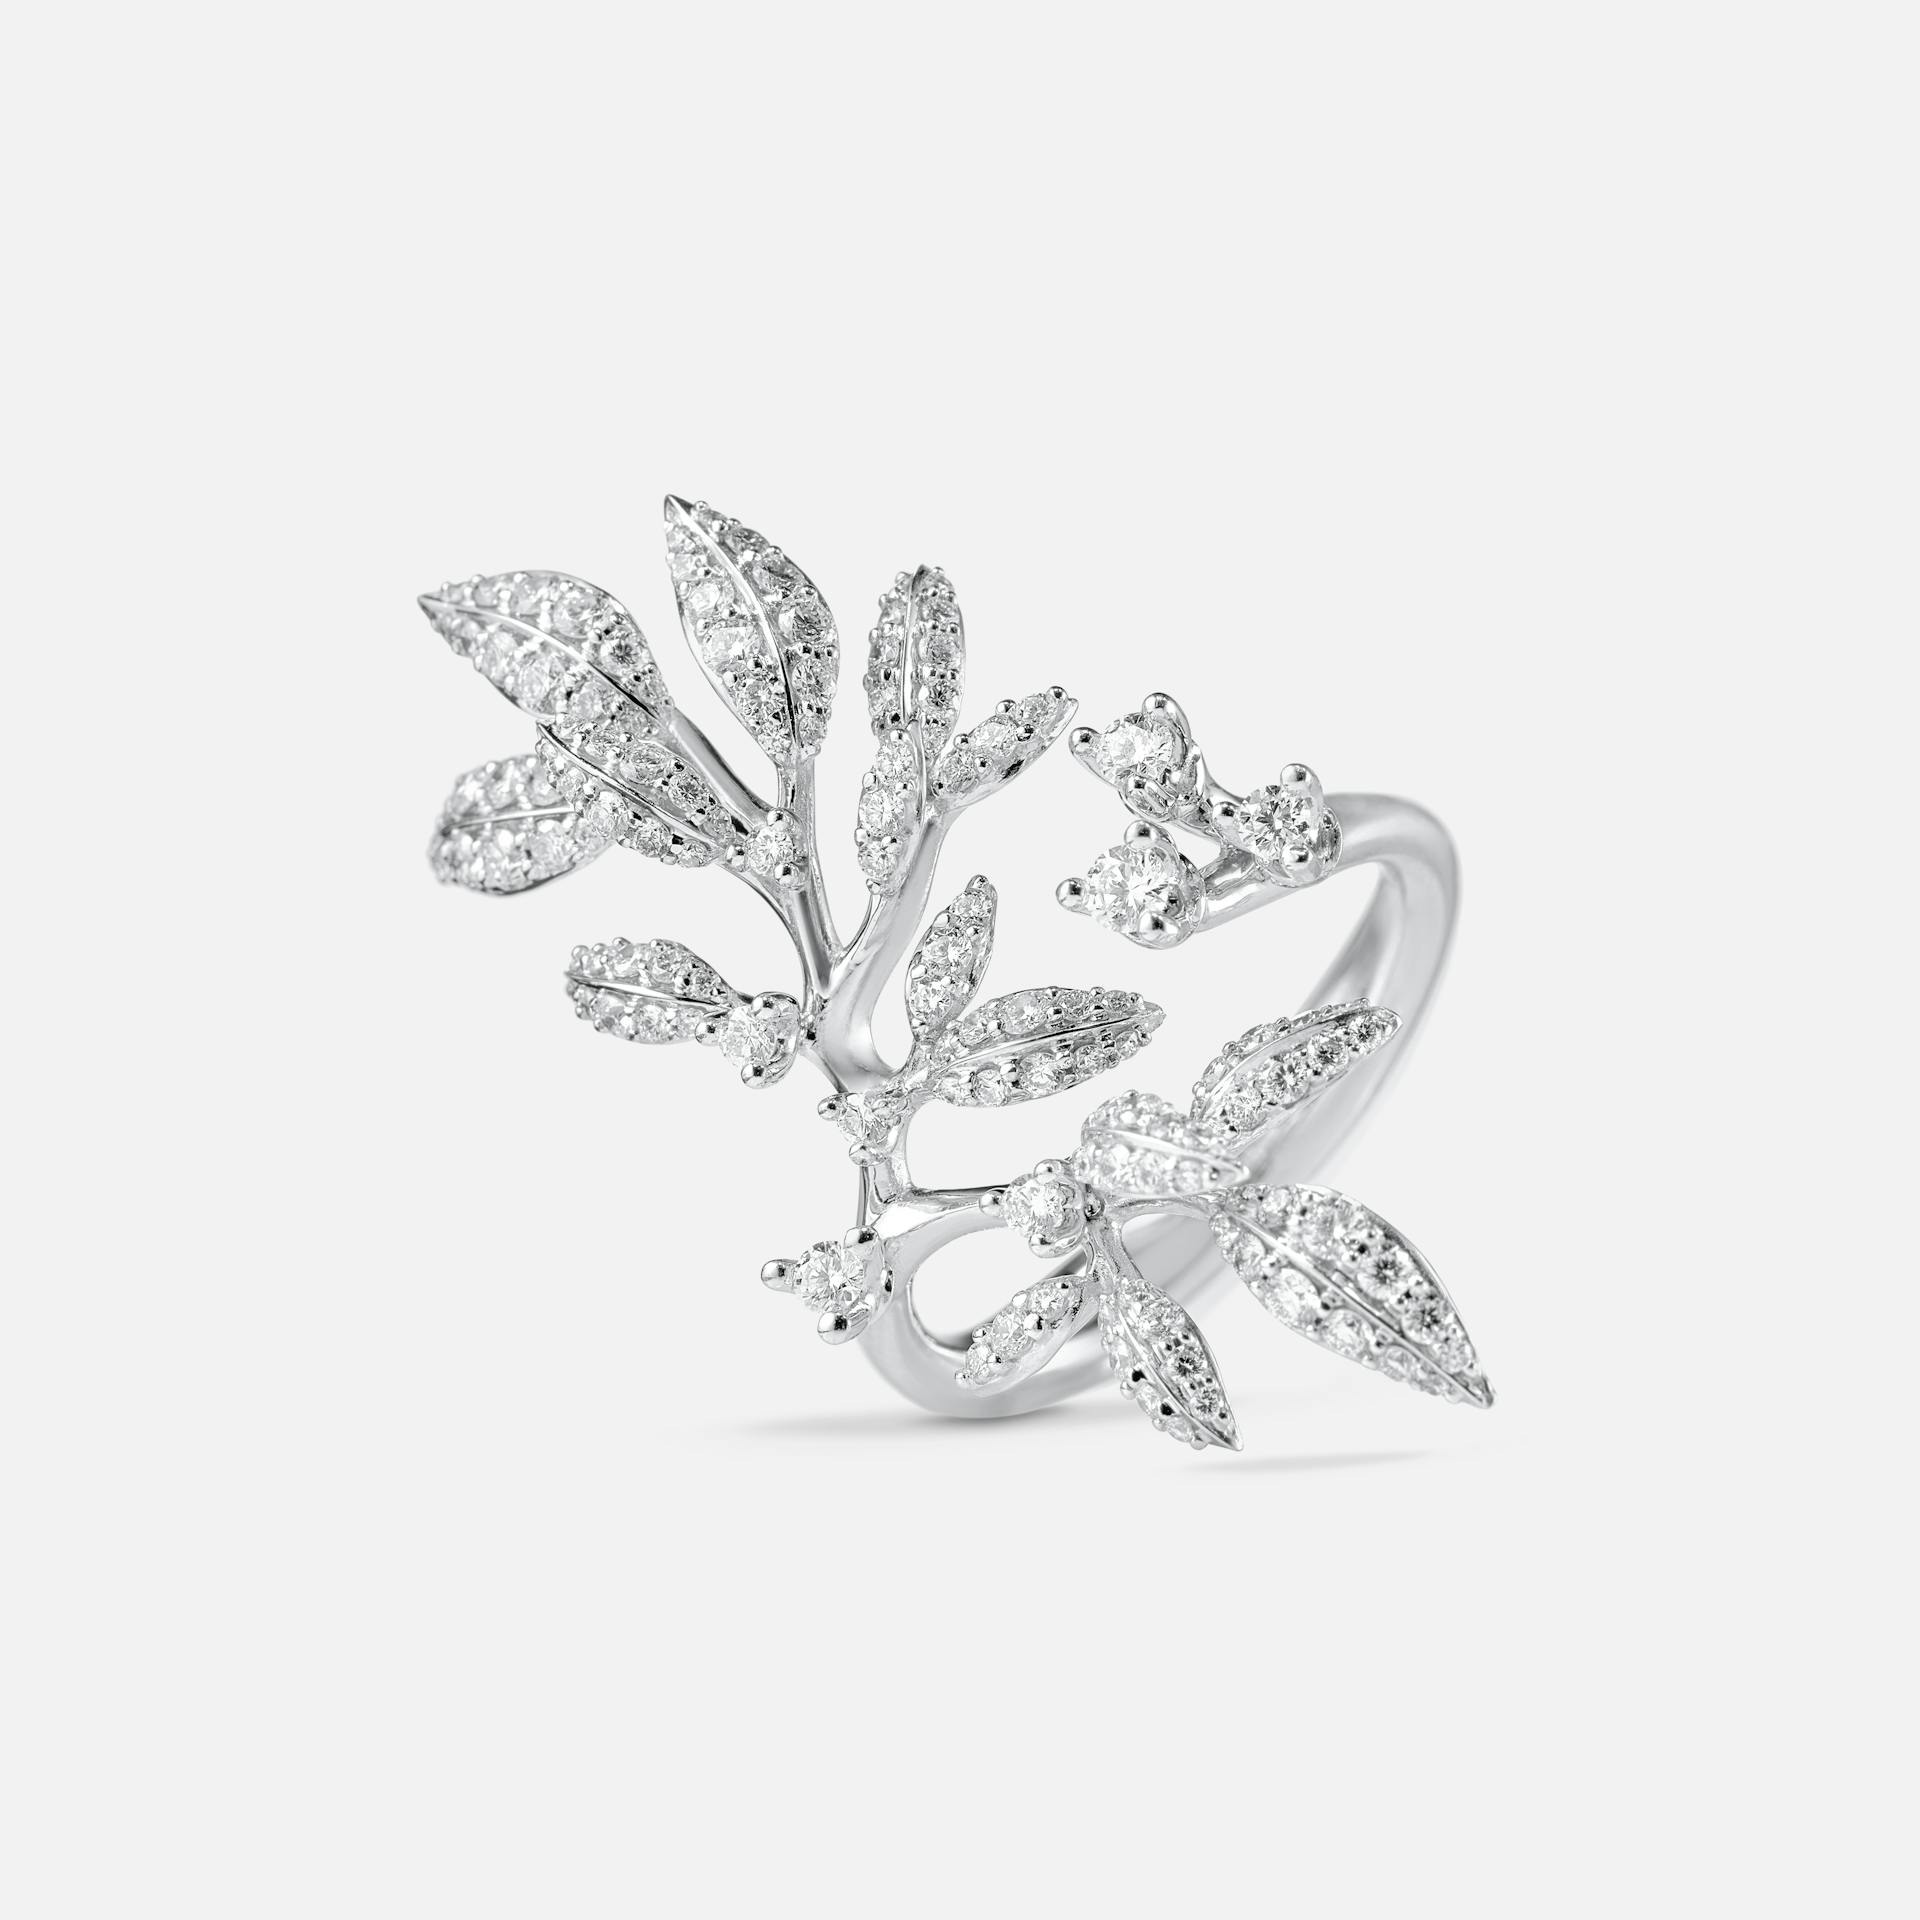 Winter Frost Ring Large in White Gold with Diamonds  |  Ole Lynggaard Copenhagen 